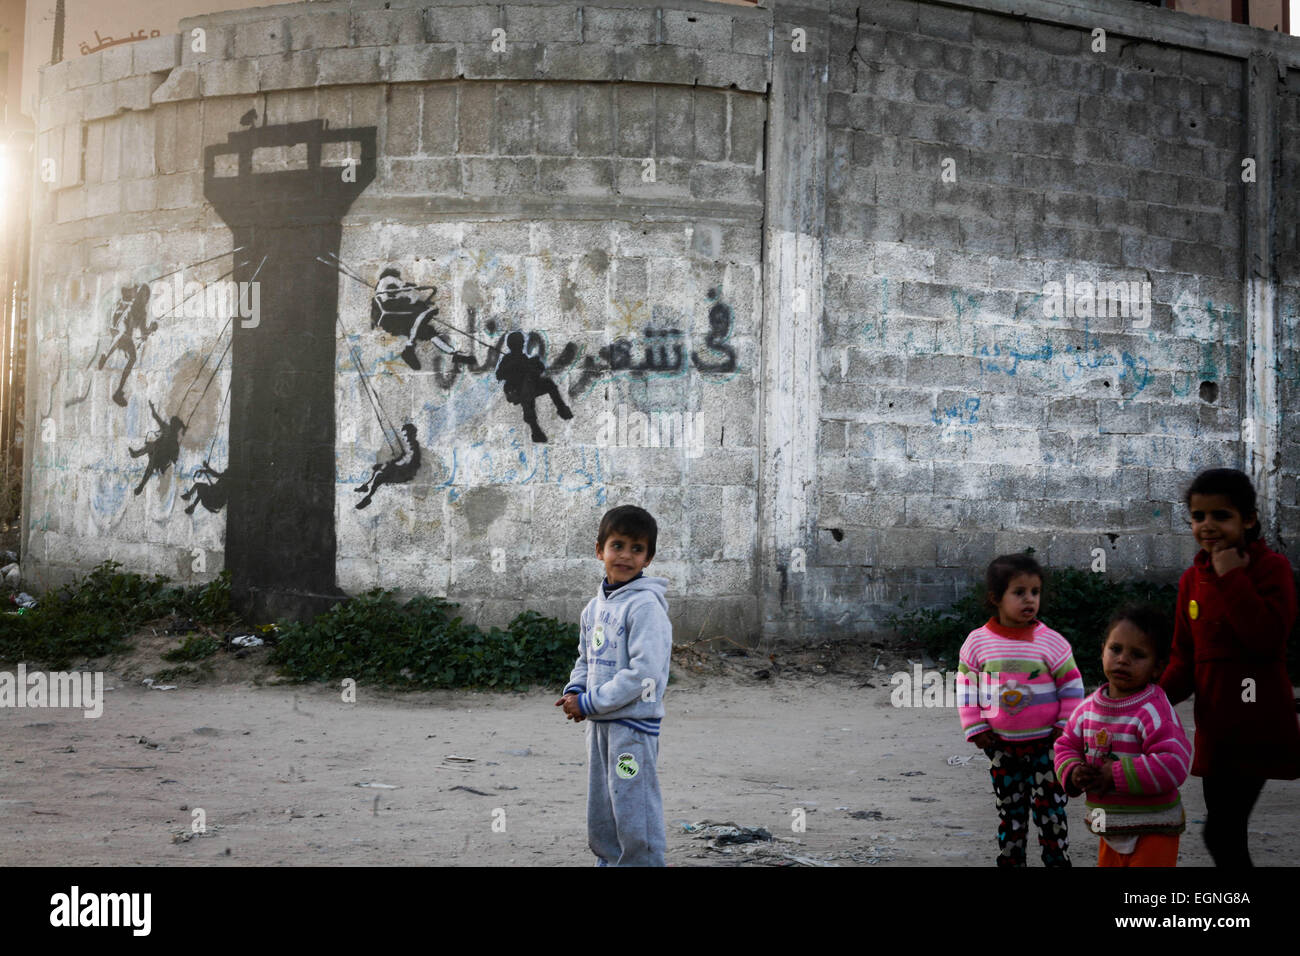 Palestinian children in front of a mural of a kitten, said to have been painted by British street artist Banksy, on the remains of a house that was destroyed during the 50-day war between Israel and Hamas militants in the summer of 2014, in the Gaza Strip town of Beit Hanun. © Ahmed Hjazy/Pacific Press/Alamy Live News Stock Photo